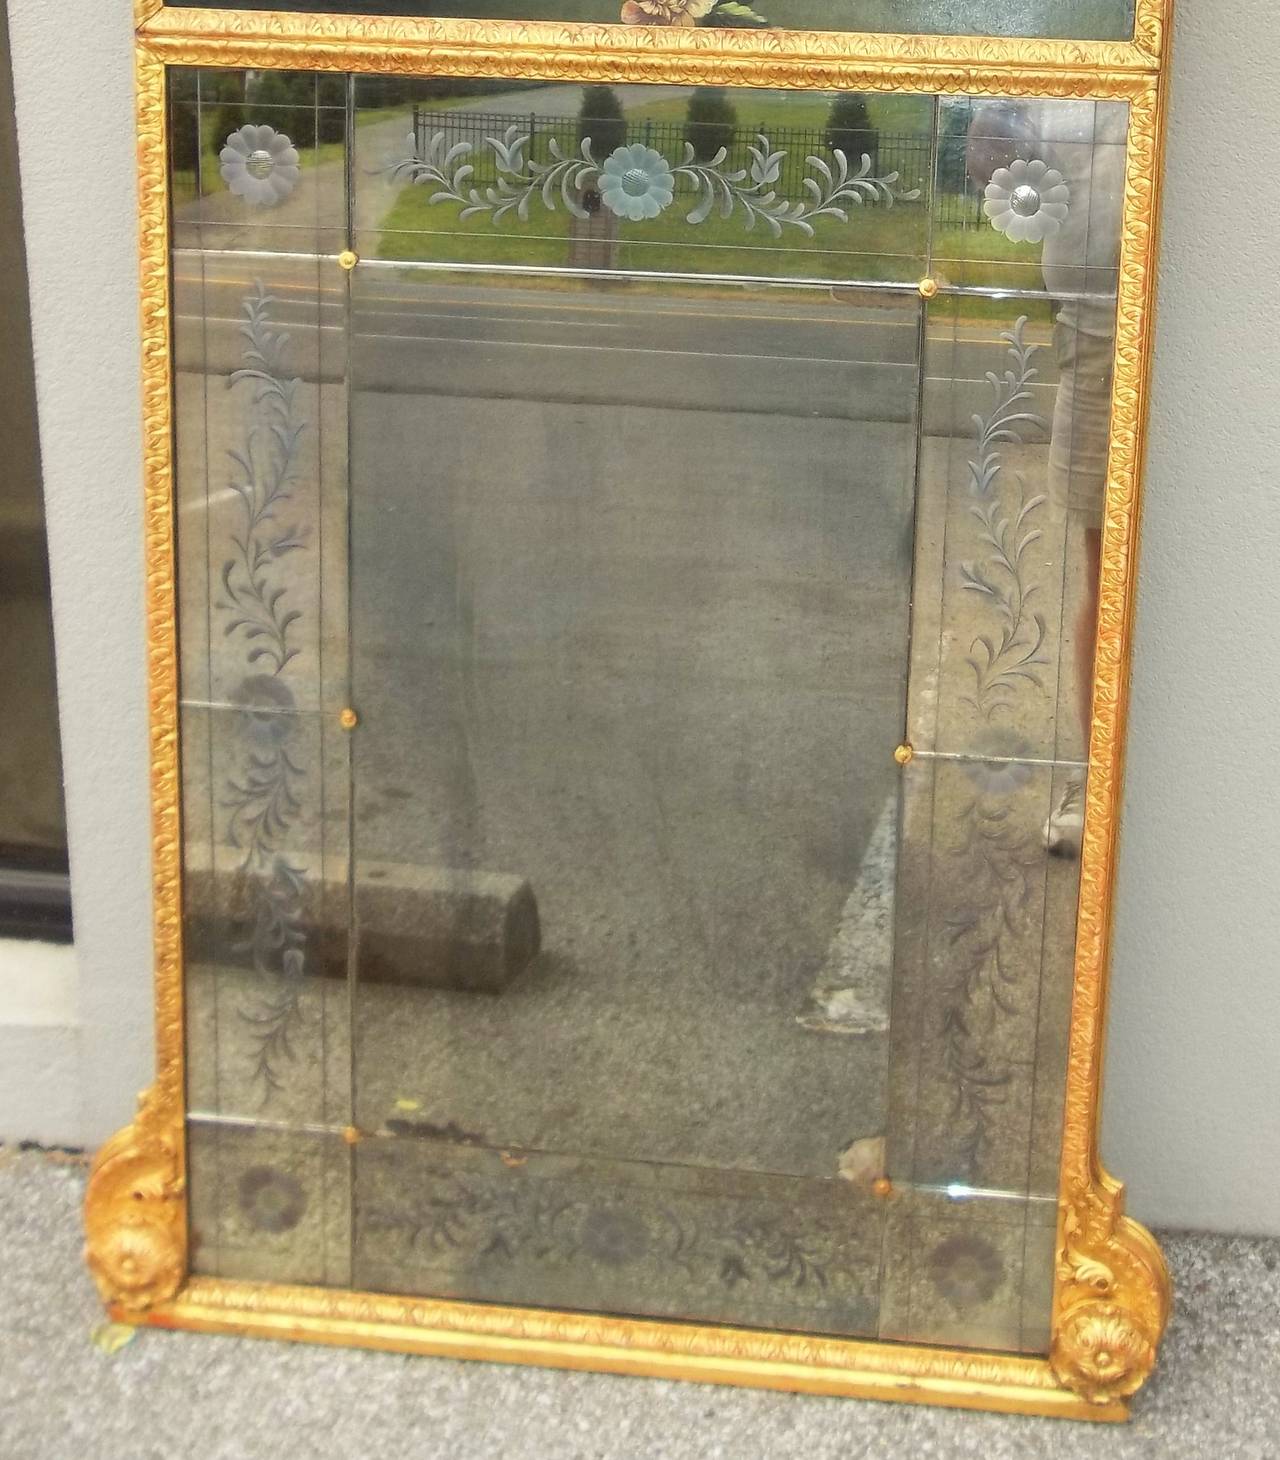 Early 20th Century Italian Trumeau Mirror with Venetian Etched Floral Plates and Floral Oil